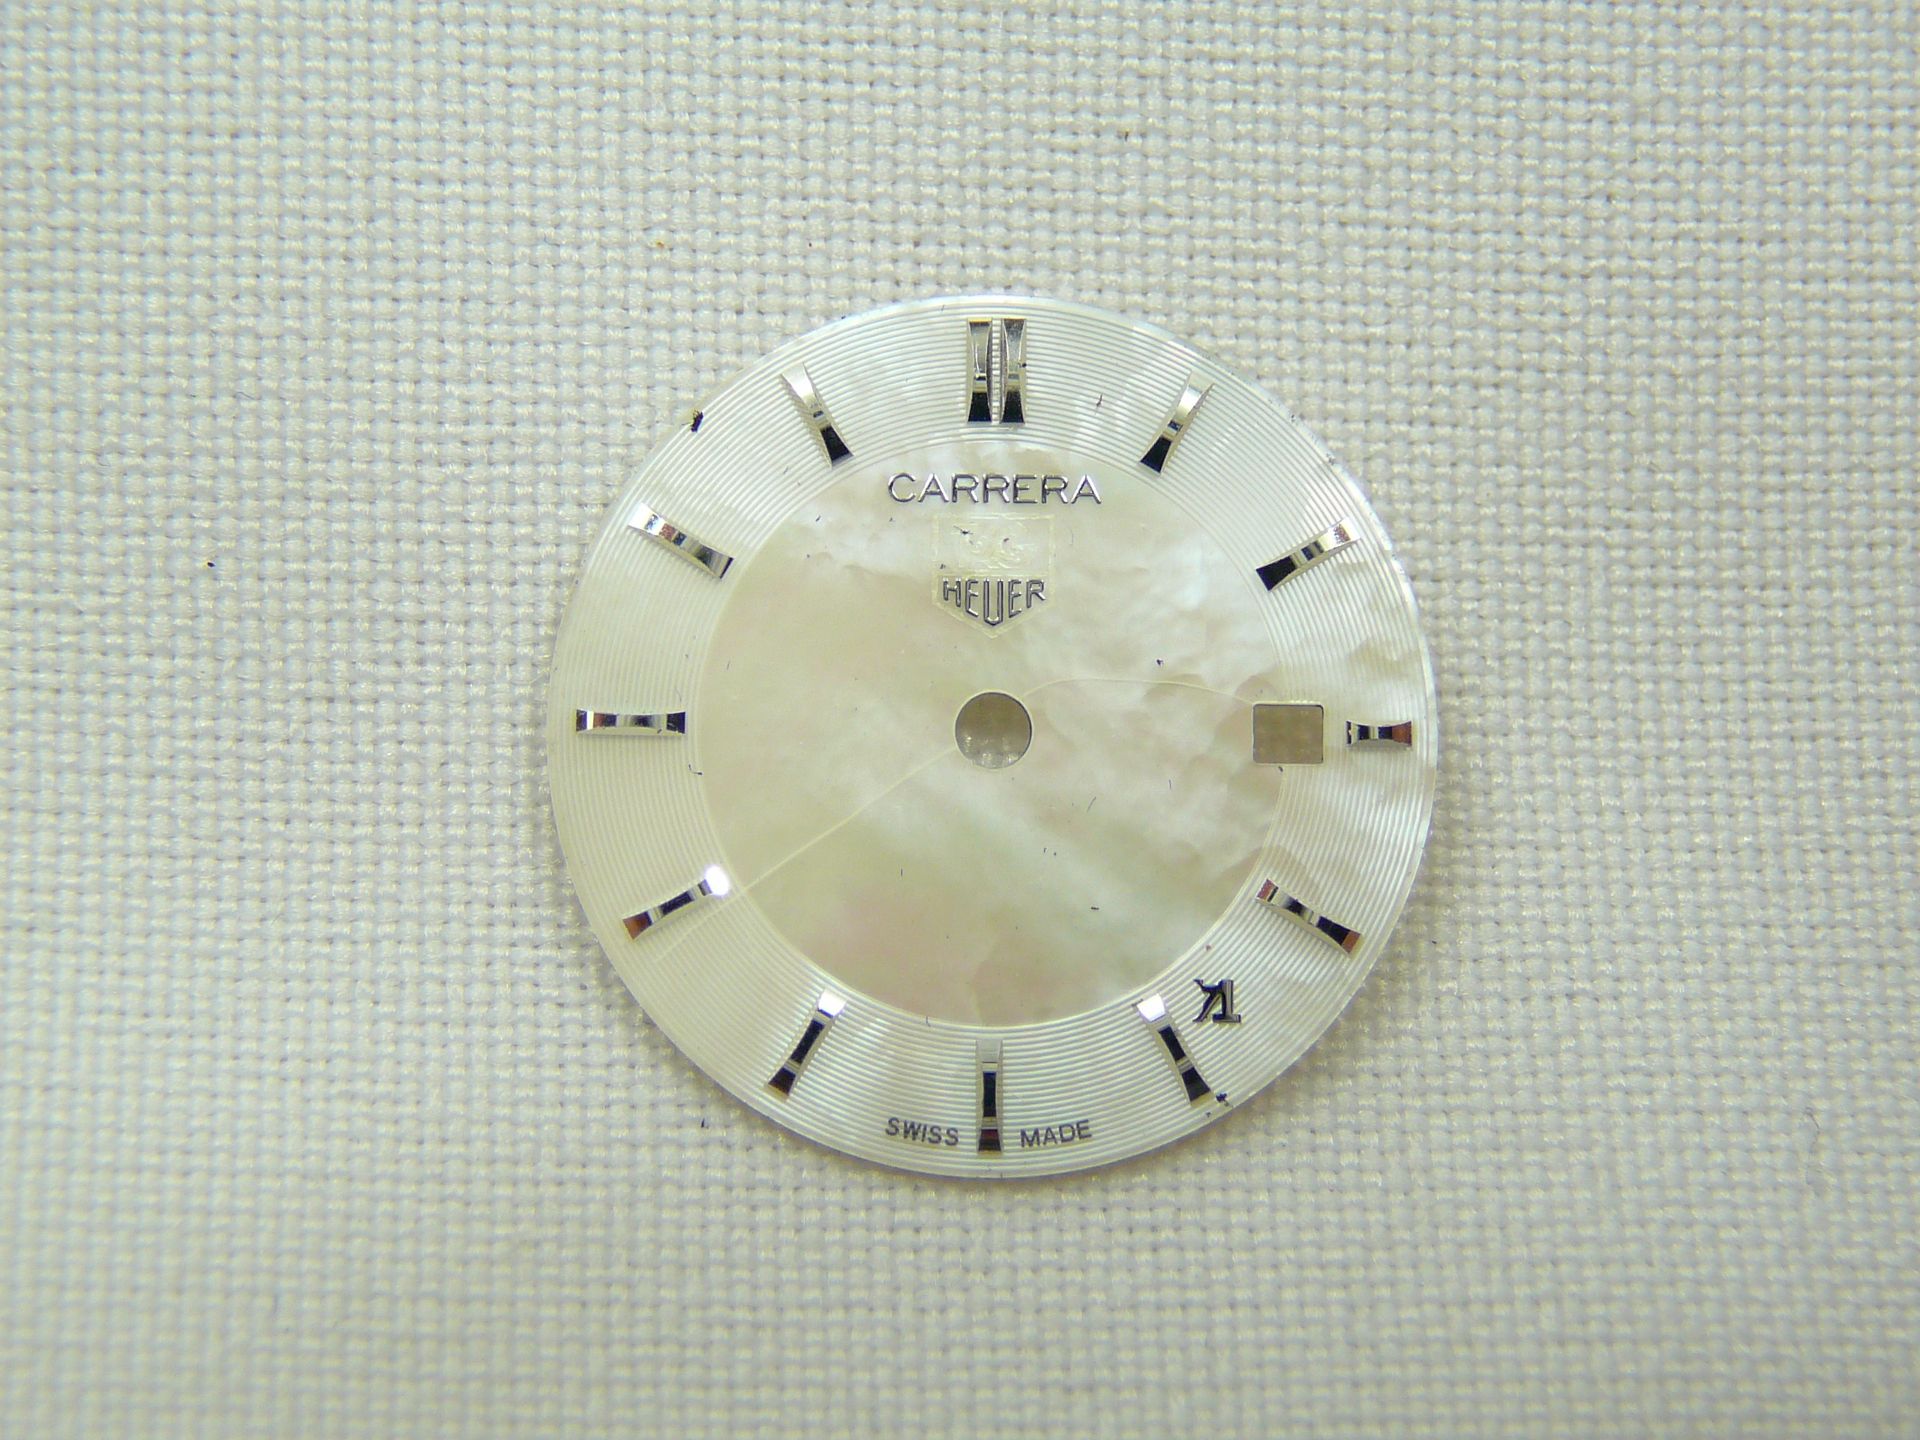 Tag Heuer 20mm watch dial